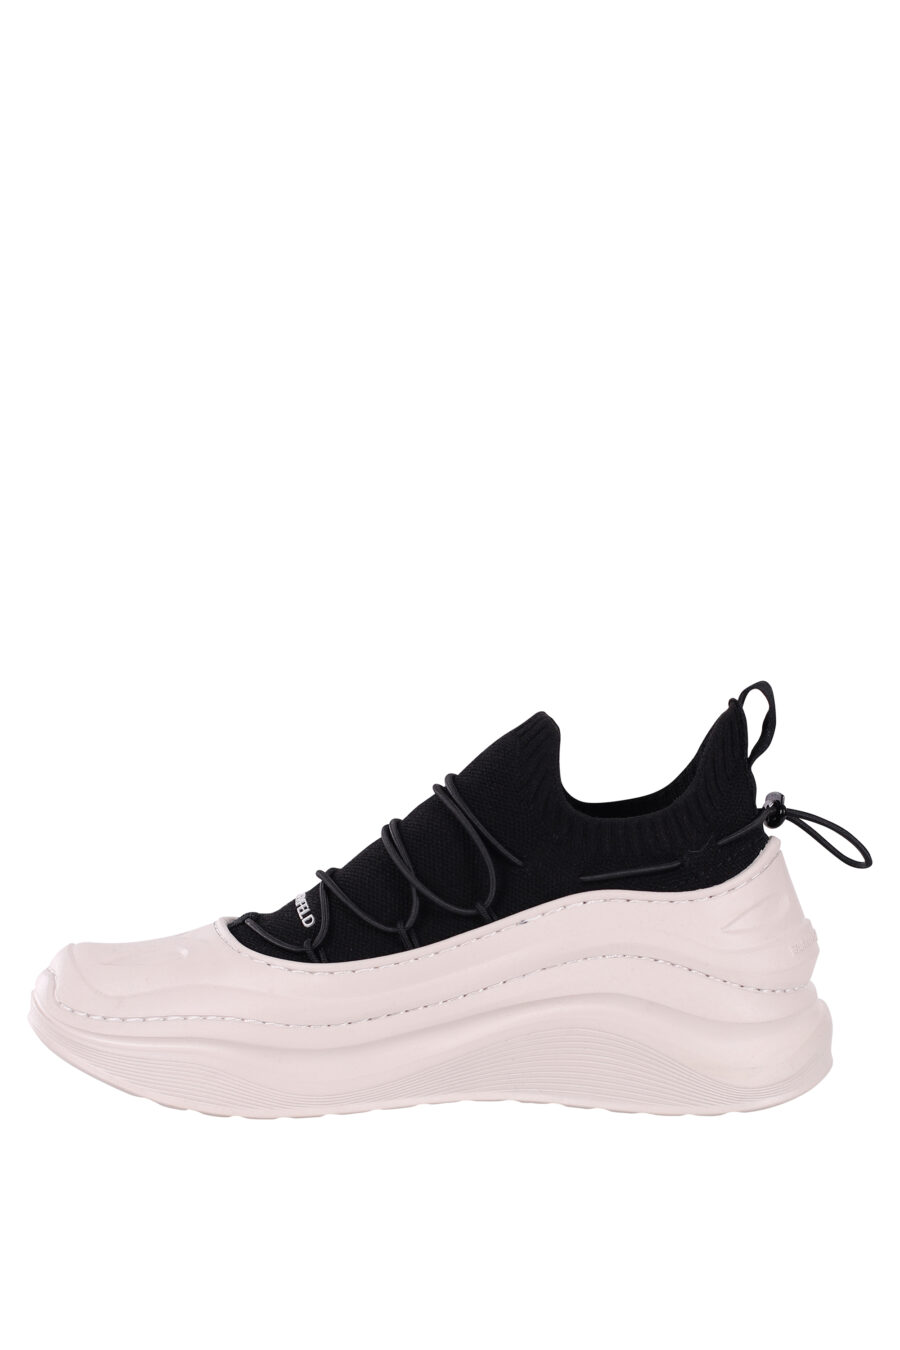 Black and white bicolour trainers with wavy white sole - IMG 5878